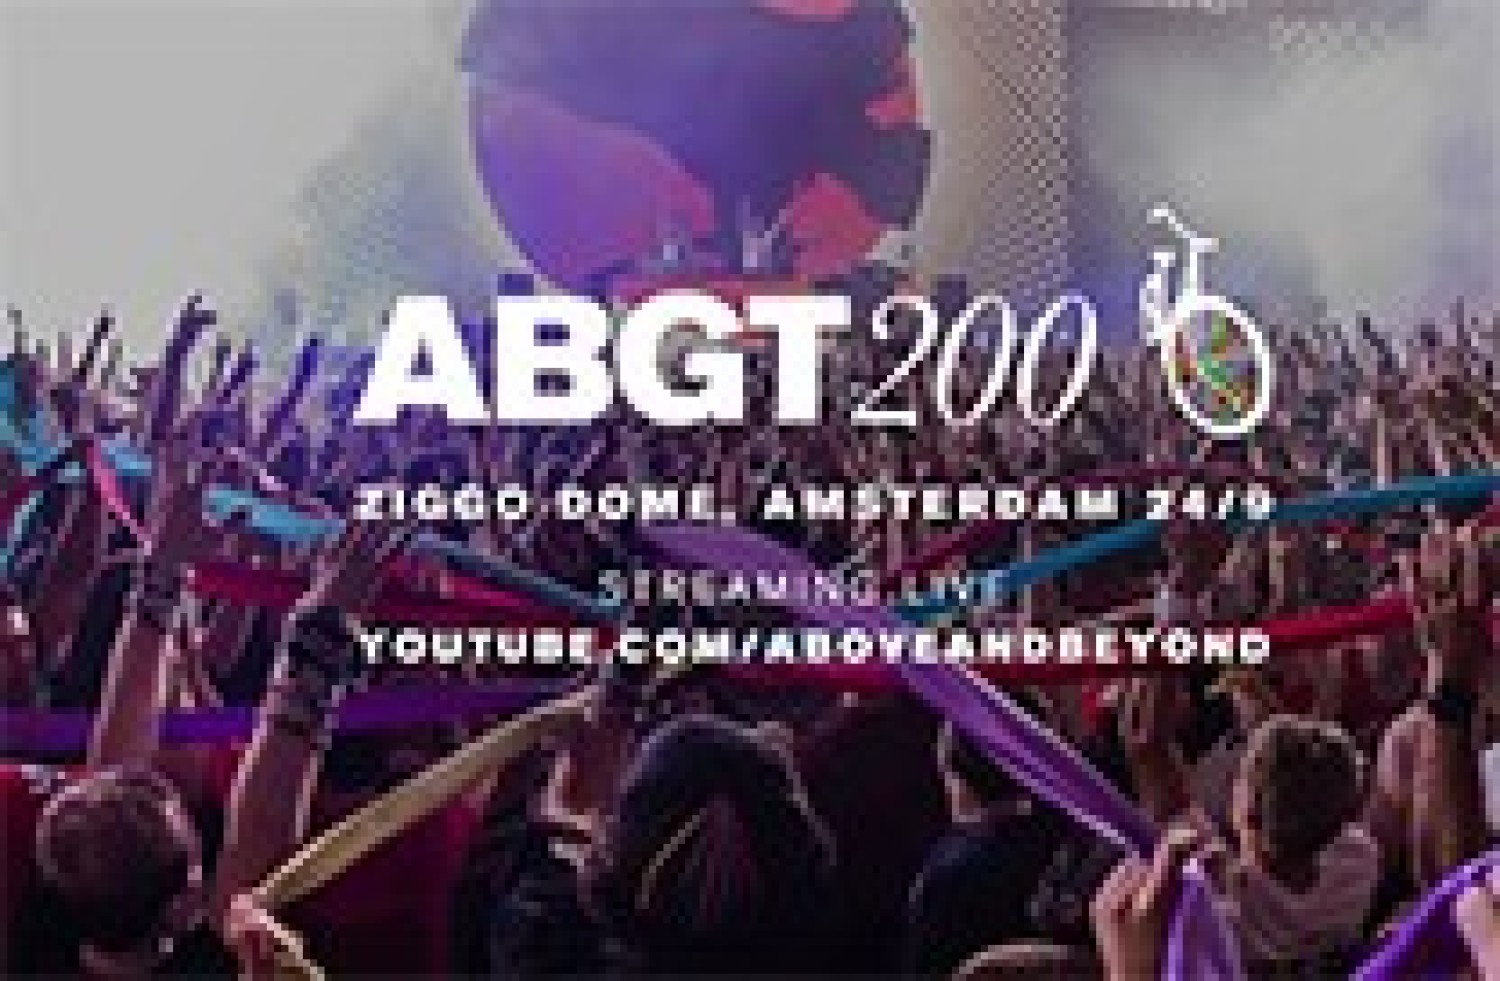 Party report: Above & Beyond, Amsterdam (24-09-2016)